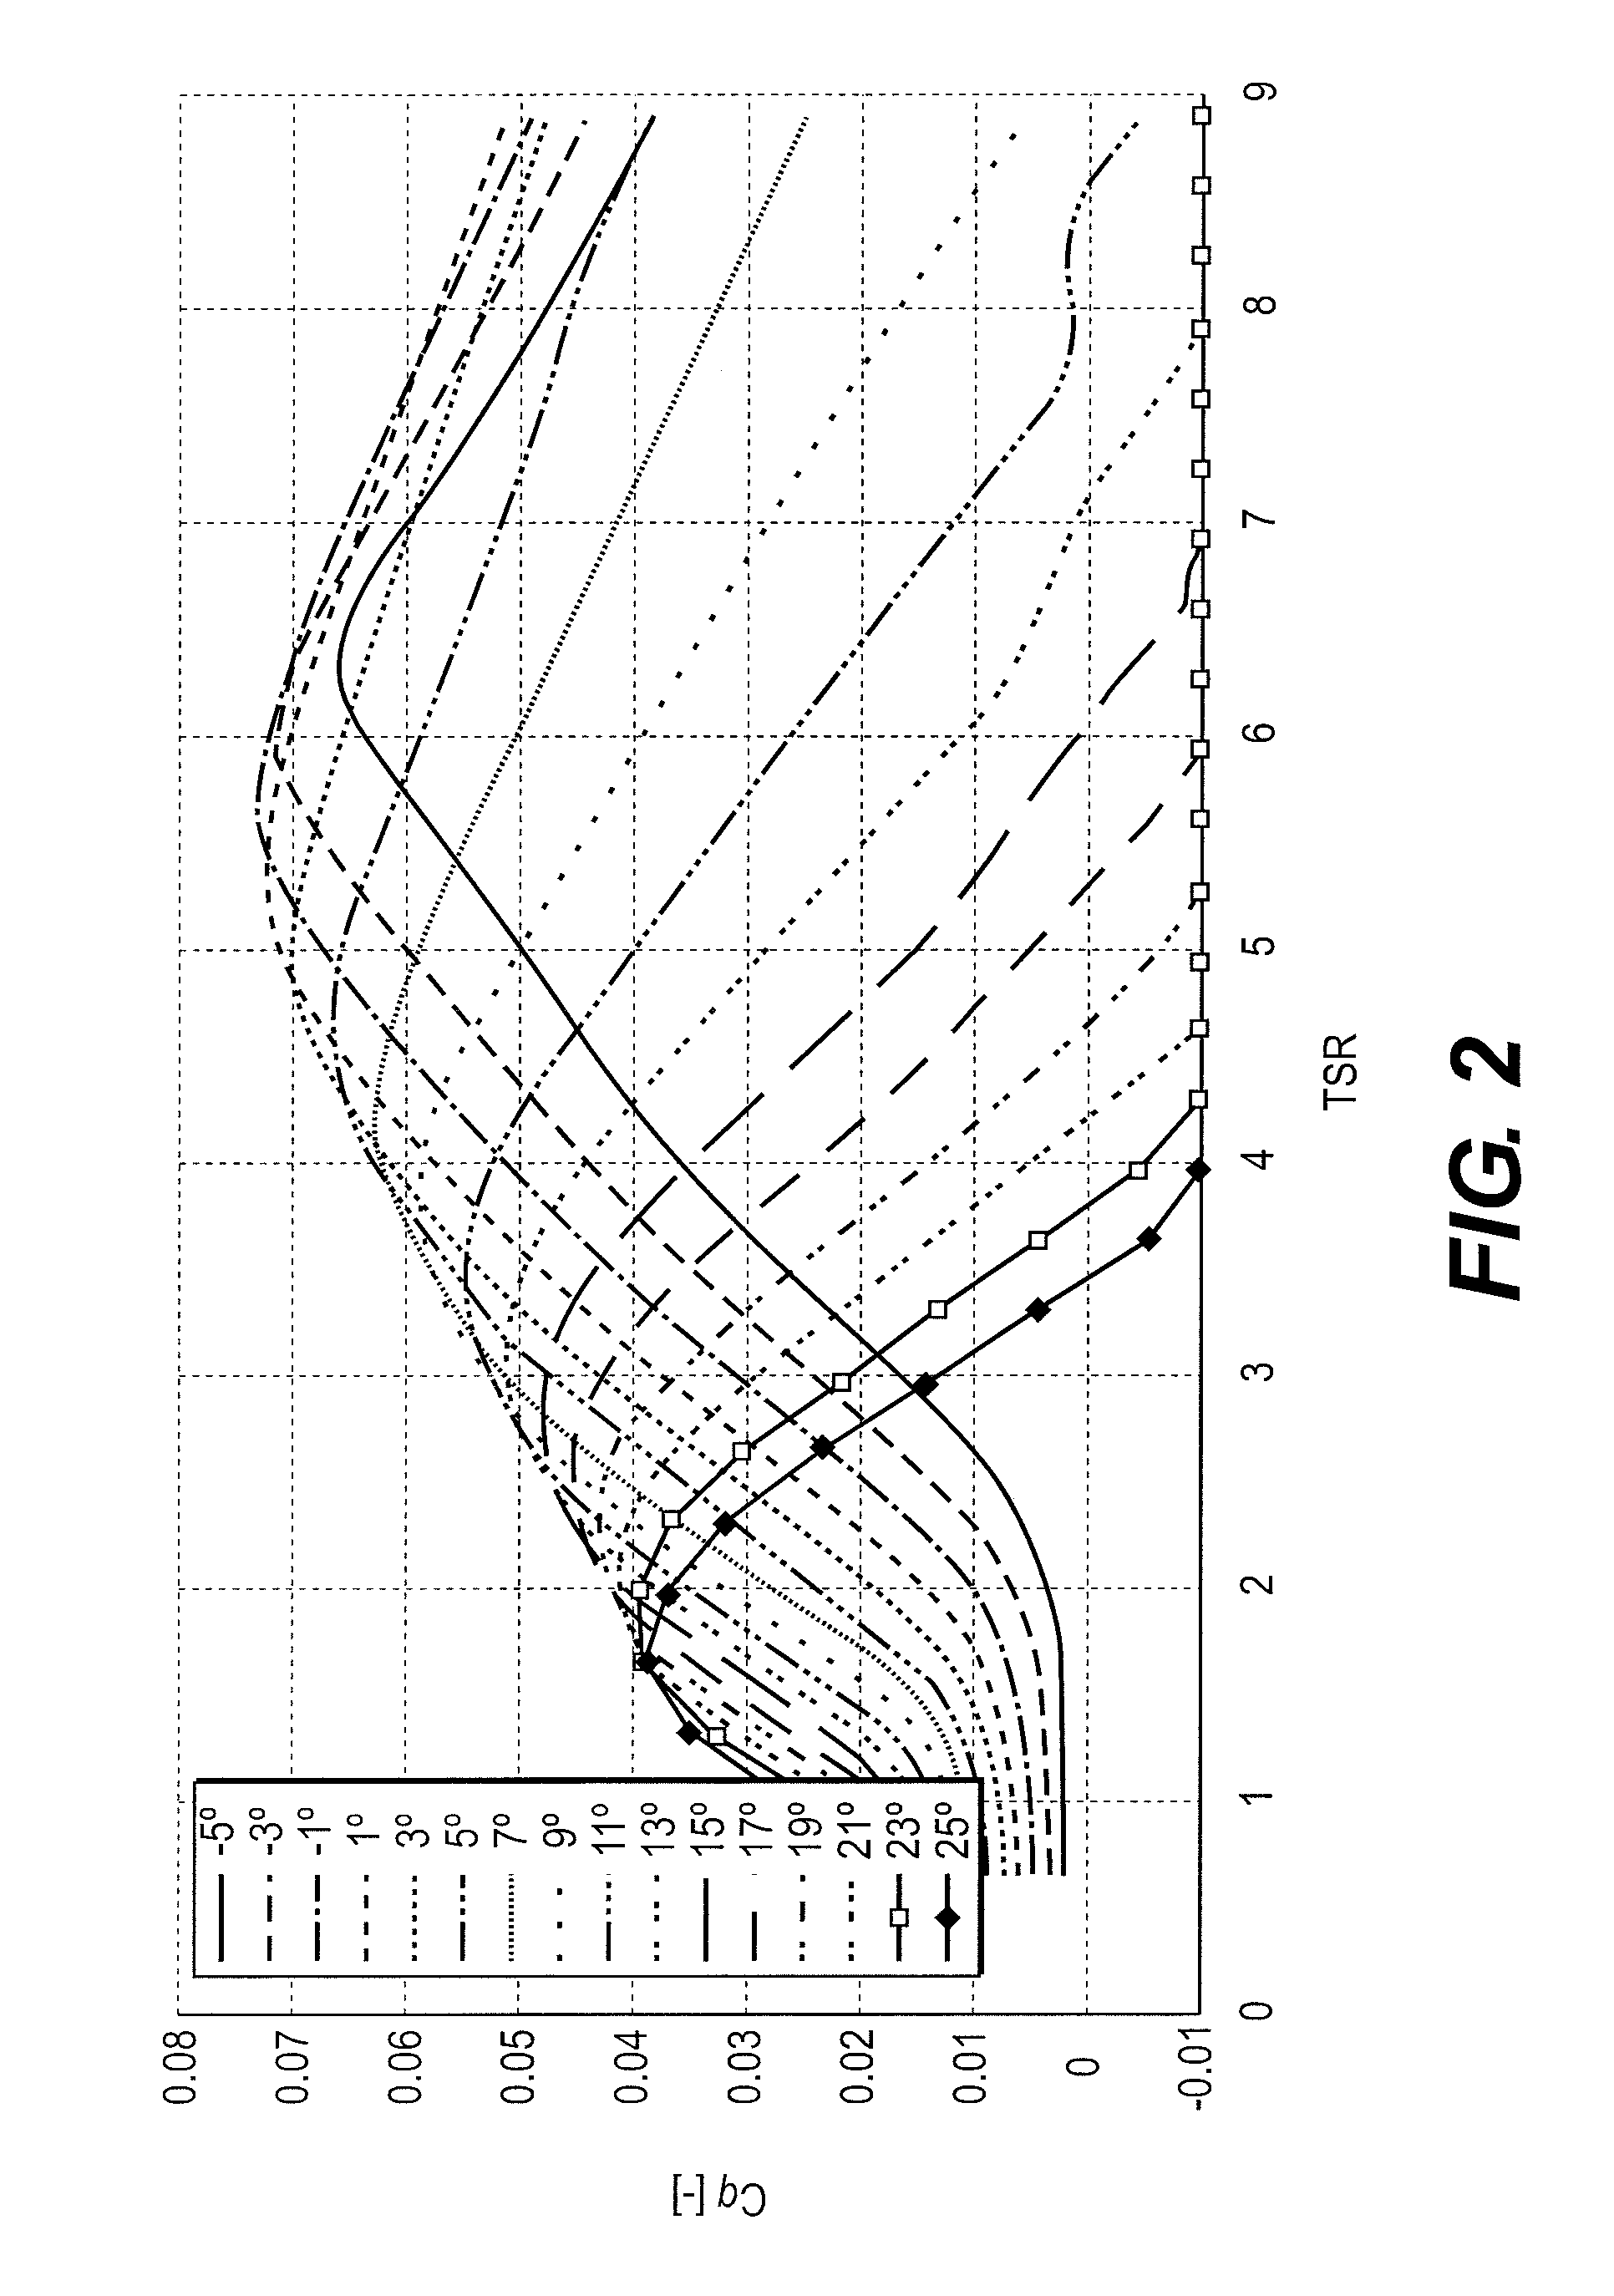 Method for controlling a wind turbine by optimizing its production while minimizing the mechanical impact on the transmission